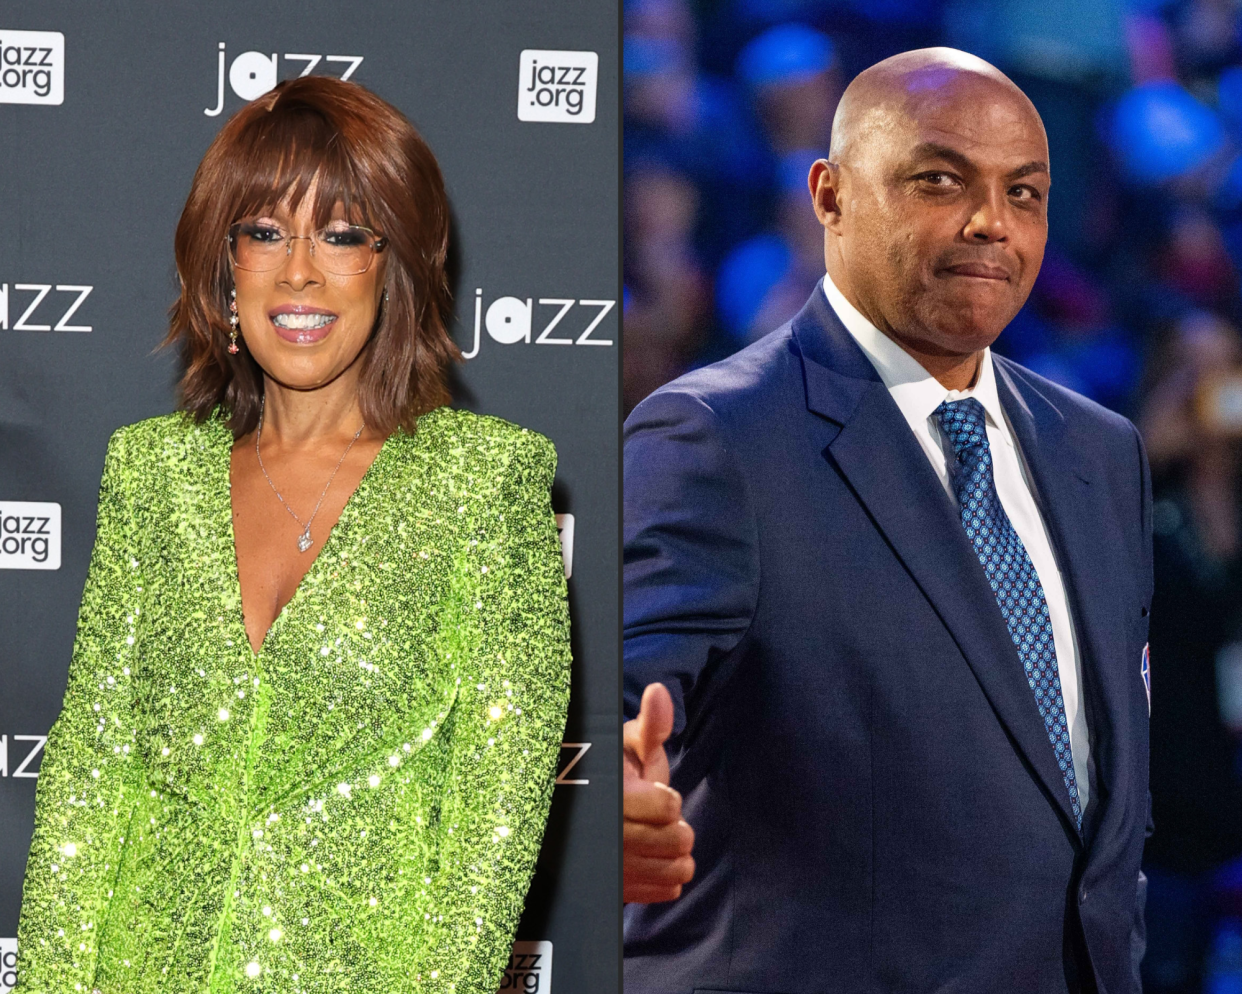 Gayle King and Charles Barkley are teaming up for a weekly CNN show, "King Charles."